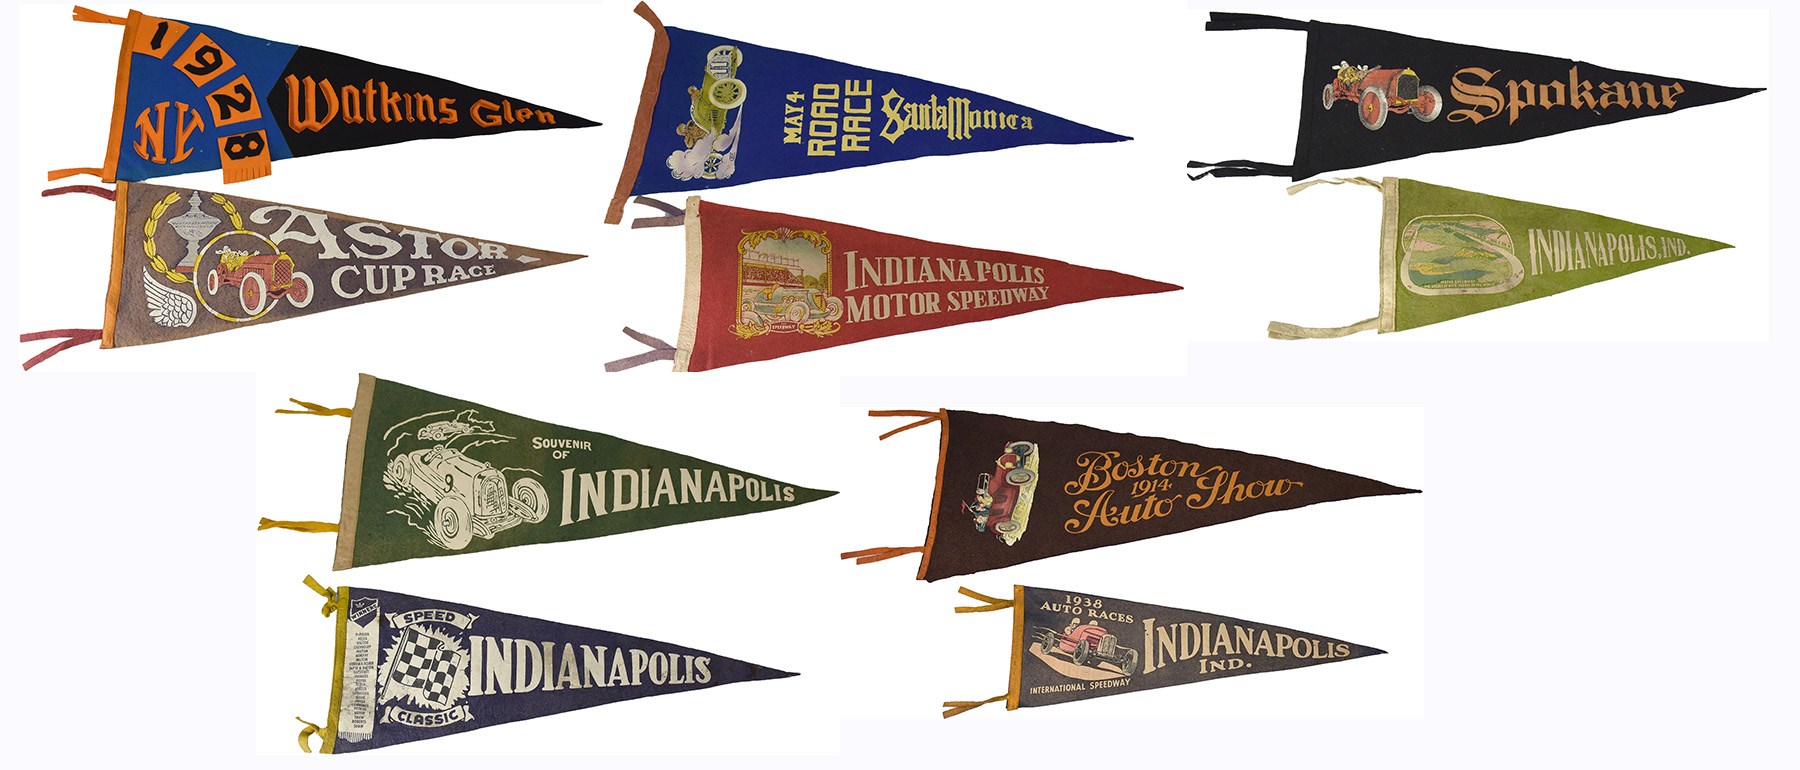 Olympics and All Sports - Early Auto Racing Pennant Collection (10)